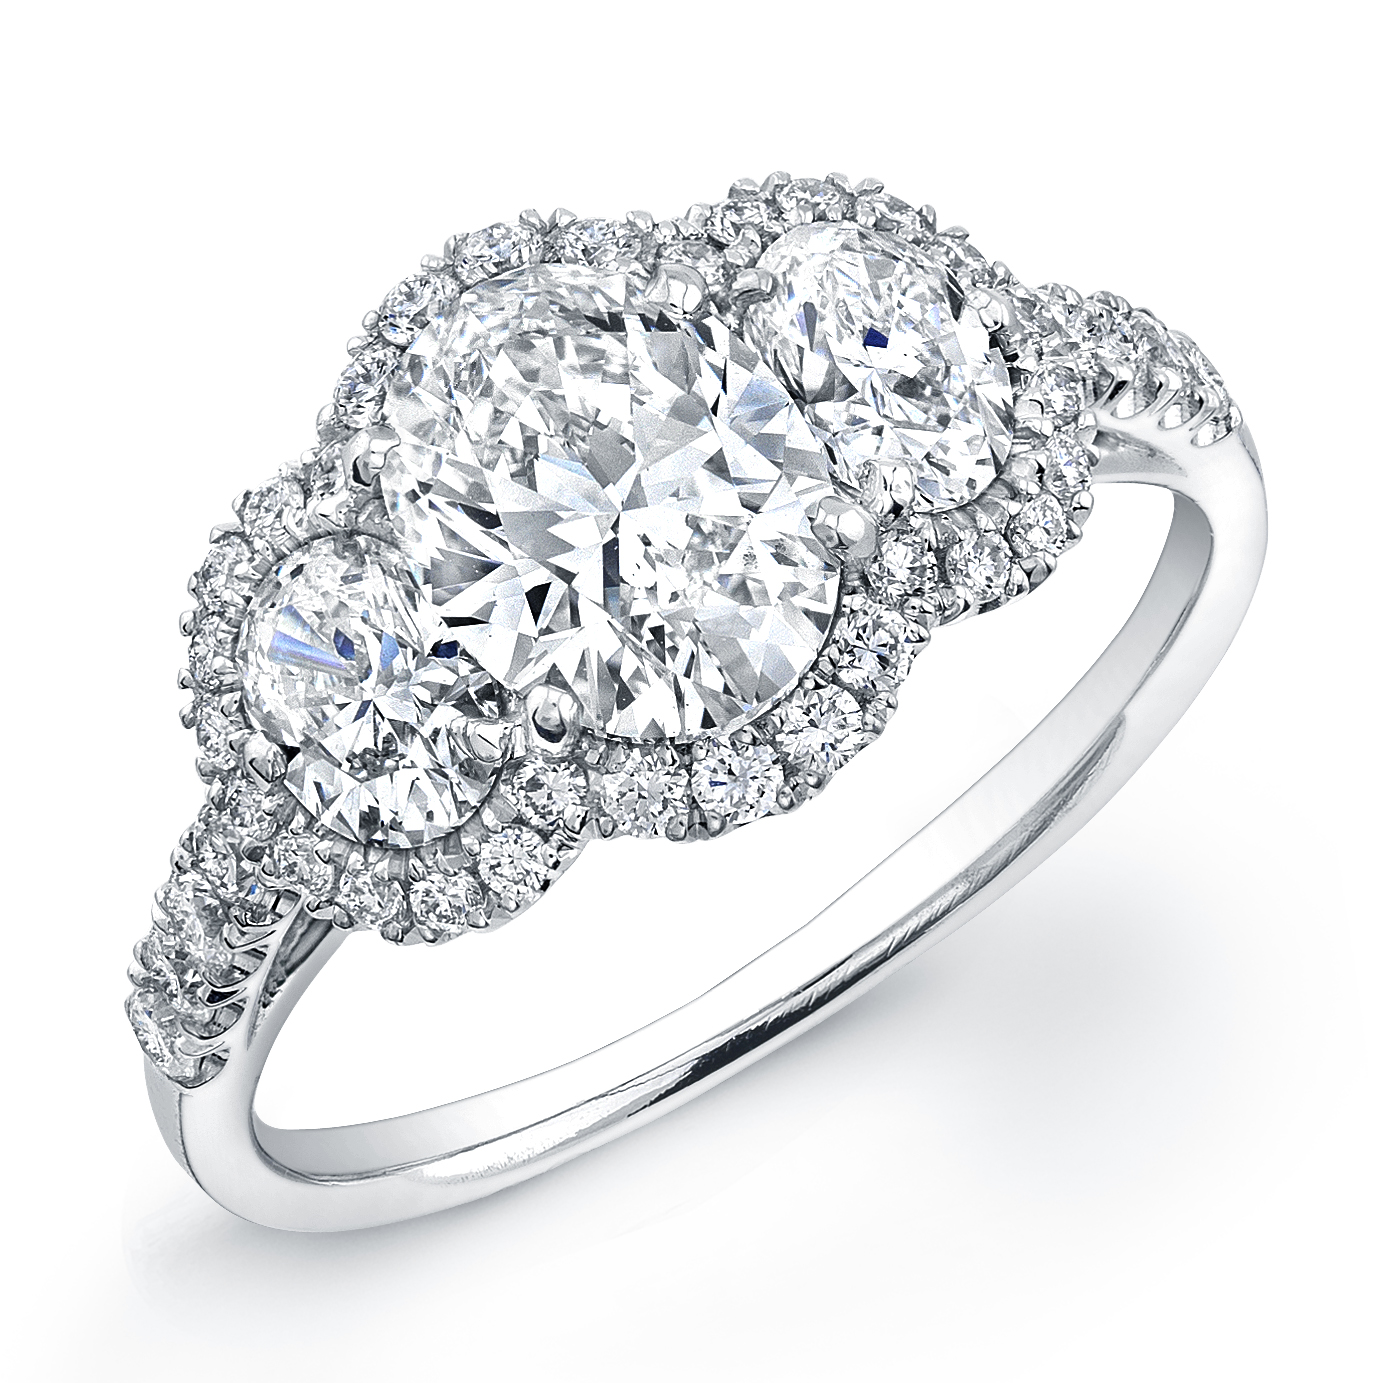 Top10 Diamond Jewelry & Rings Collection | Wedding Styles